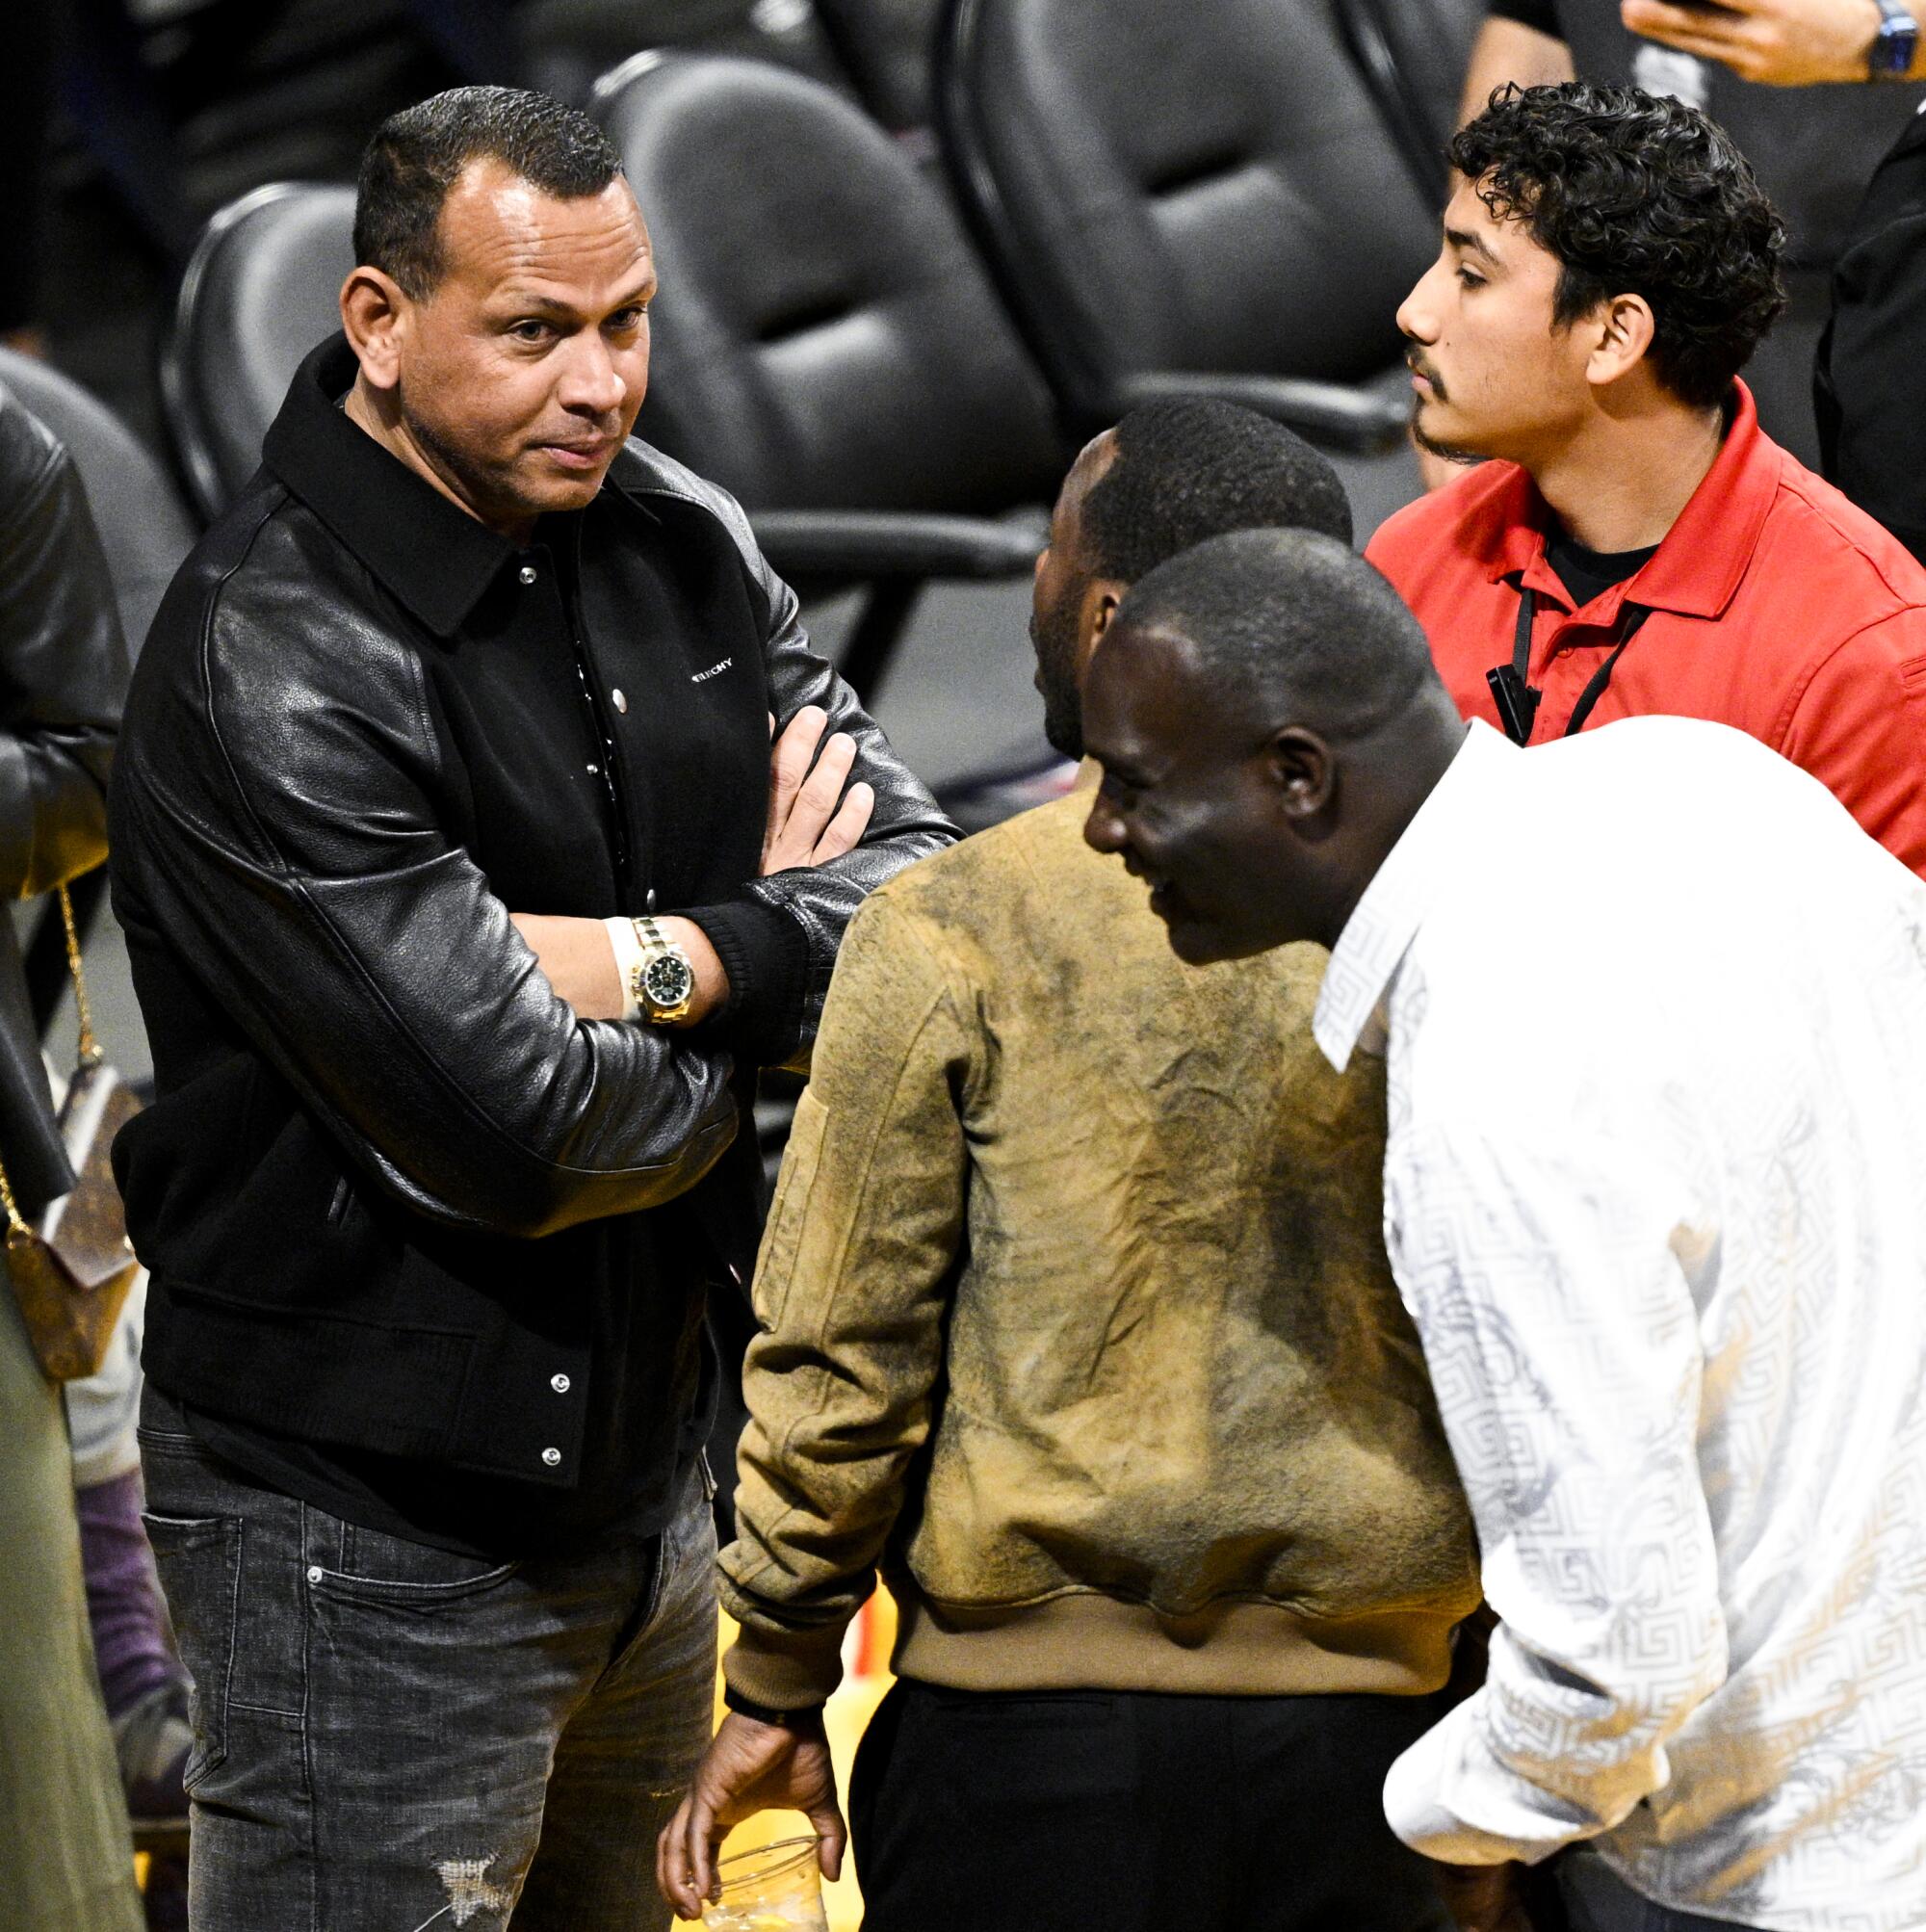 Alex Rodriguez speaks with Rich Paul during halftime of game four in the NBA Playoffs Western Conference Finals.